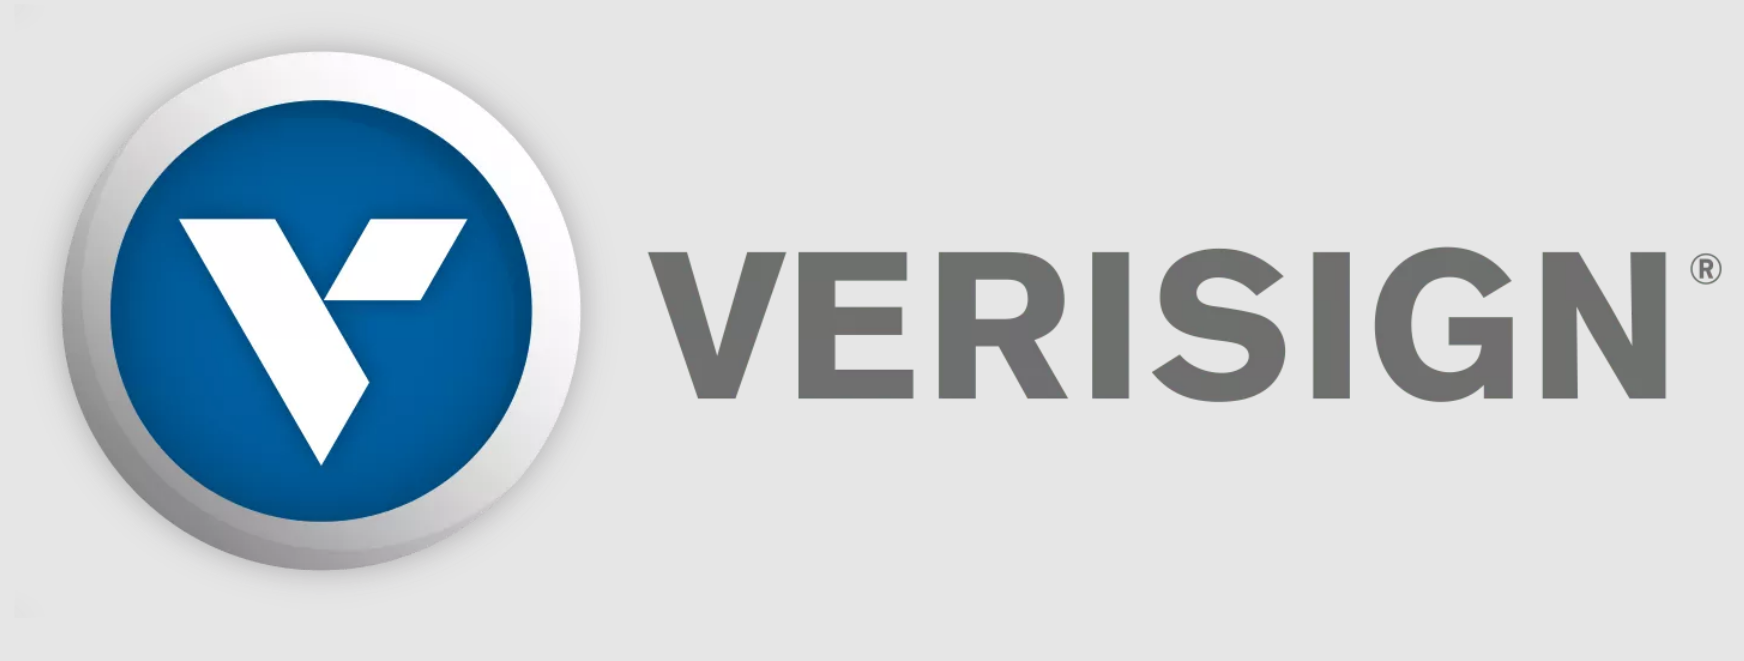 What is Verisign